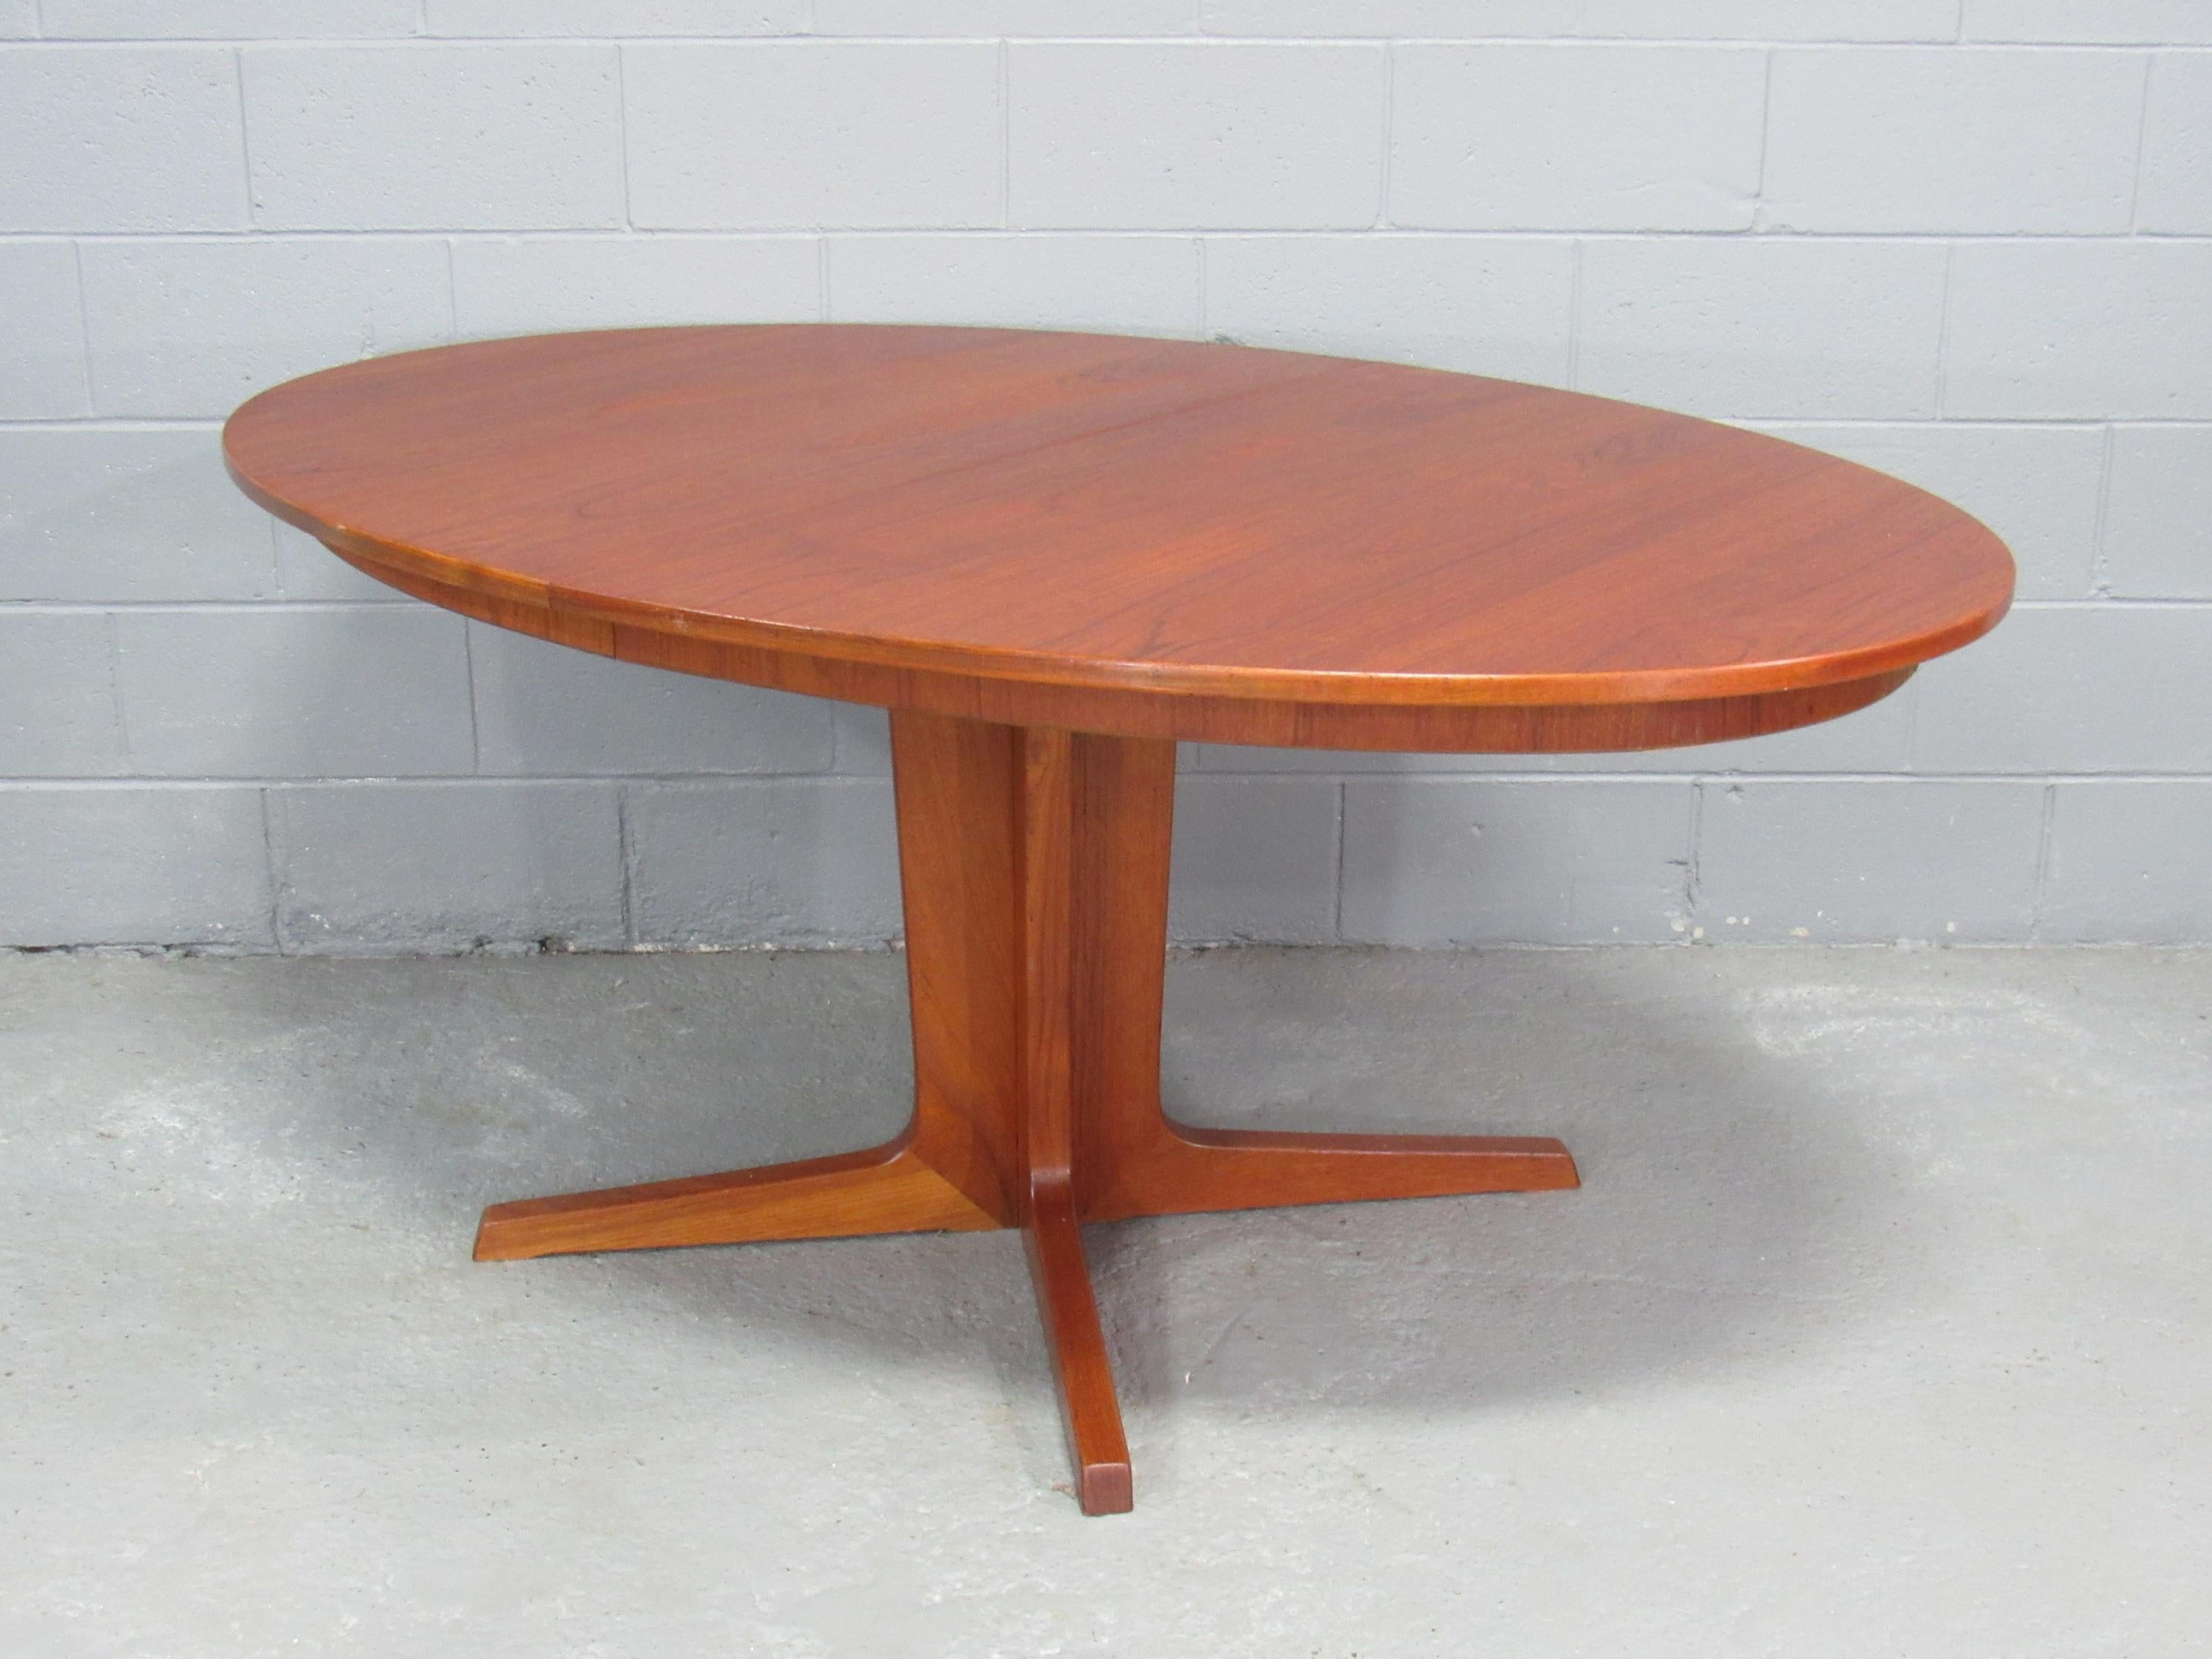 Late 20th Century Mid-Century Danish Modern Teak Extension Dining Table by Gudme, Circa 1970s